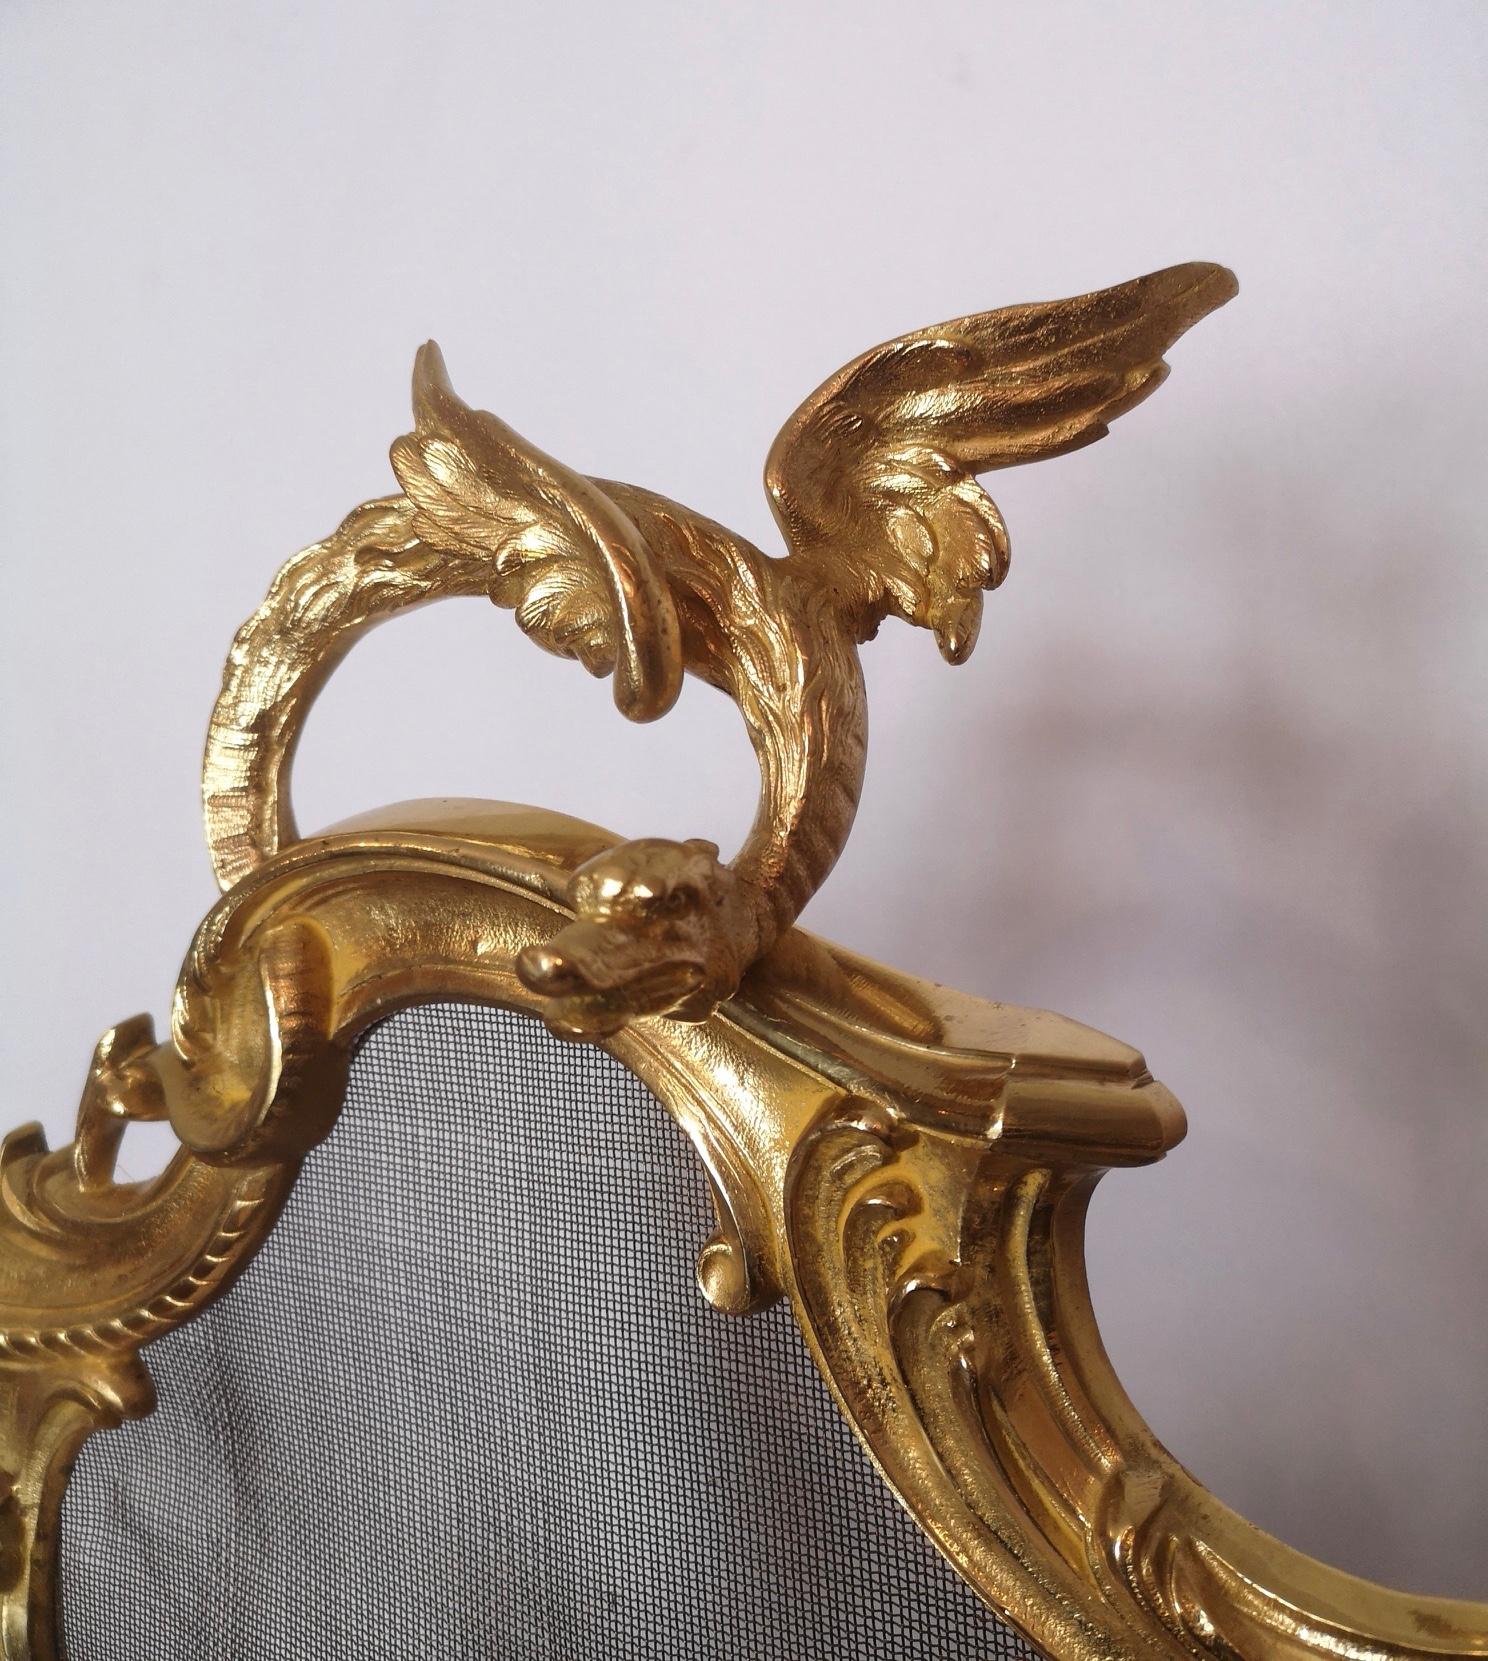 19th Century French Gilt Bronze Fire Screen For Sale 1